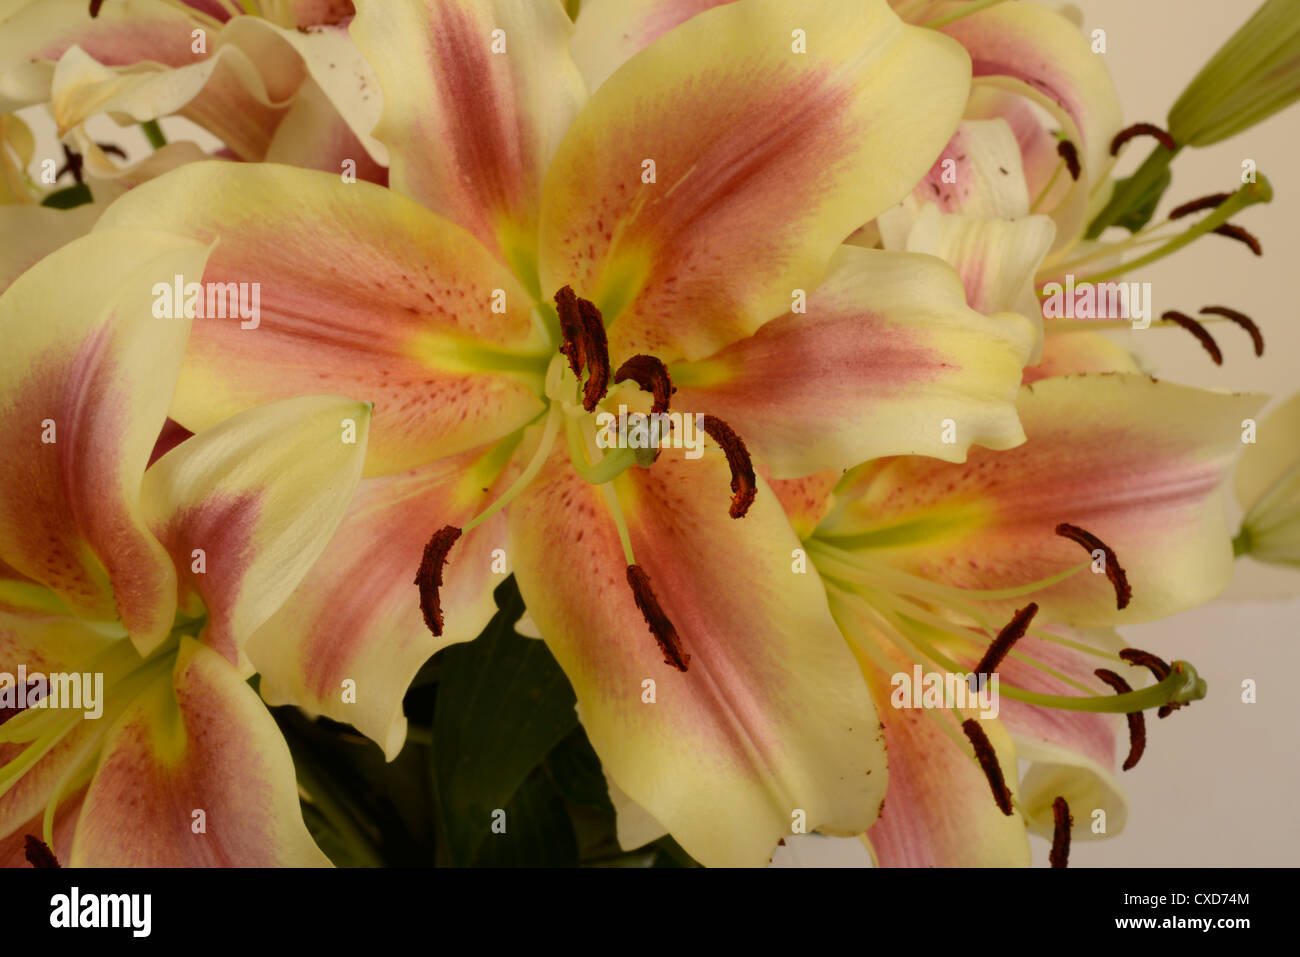 Close up of lily flower, called Shocking, showing stigma with pollen and anthers. Stock Photo